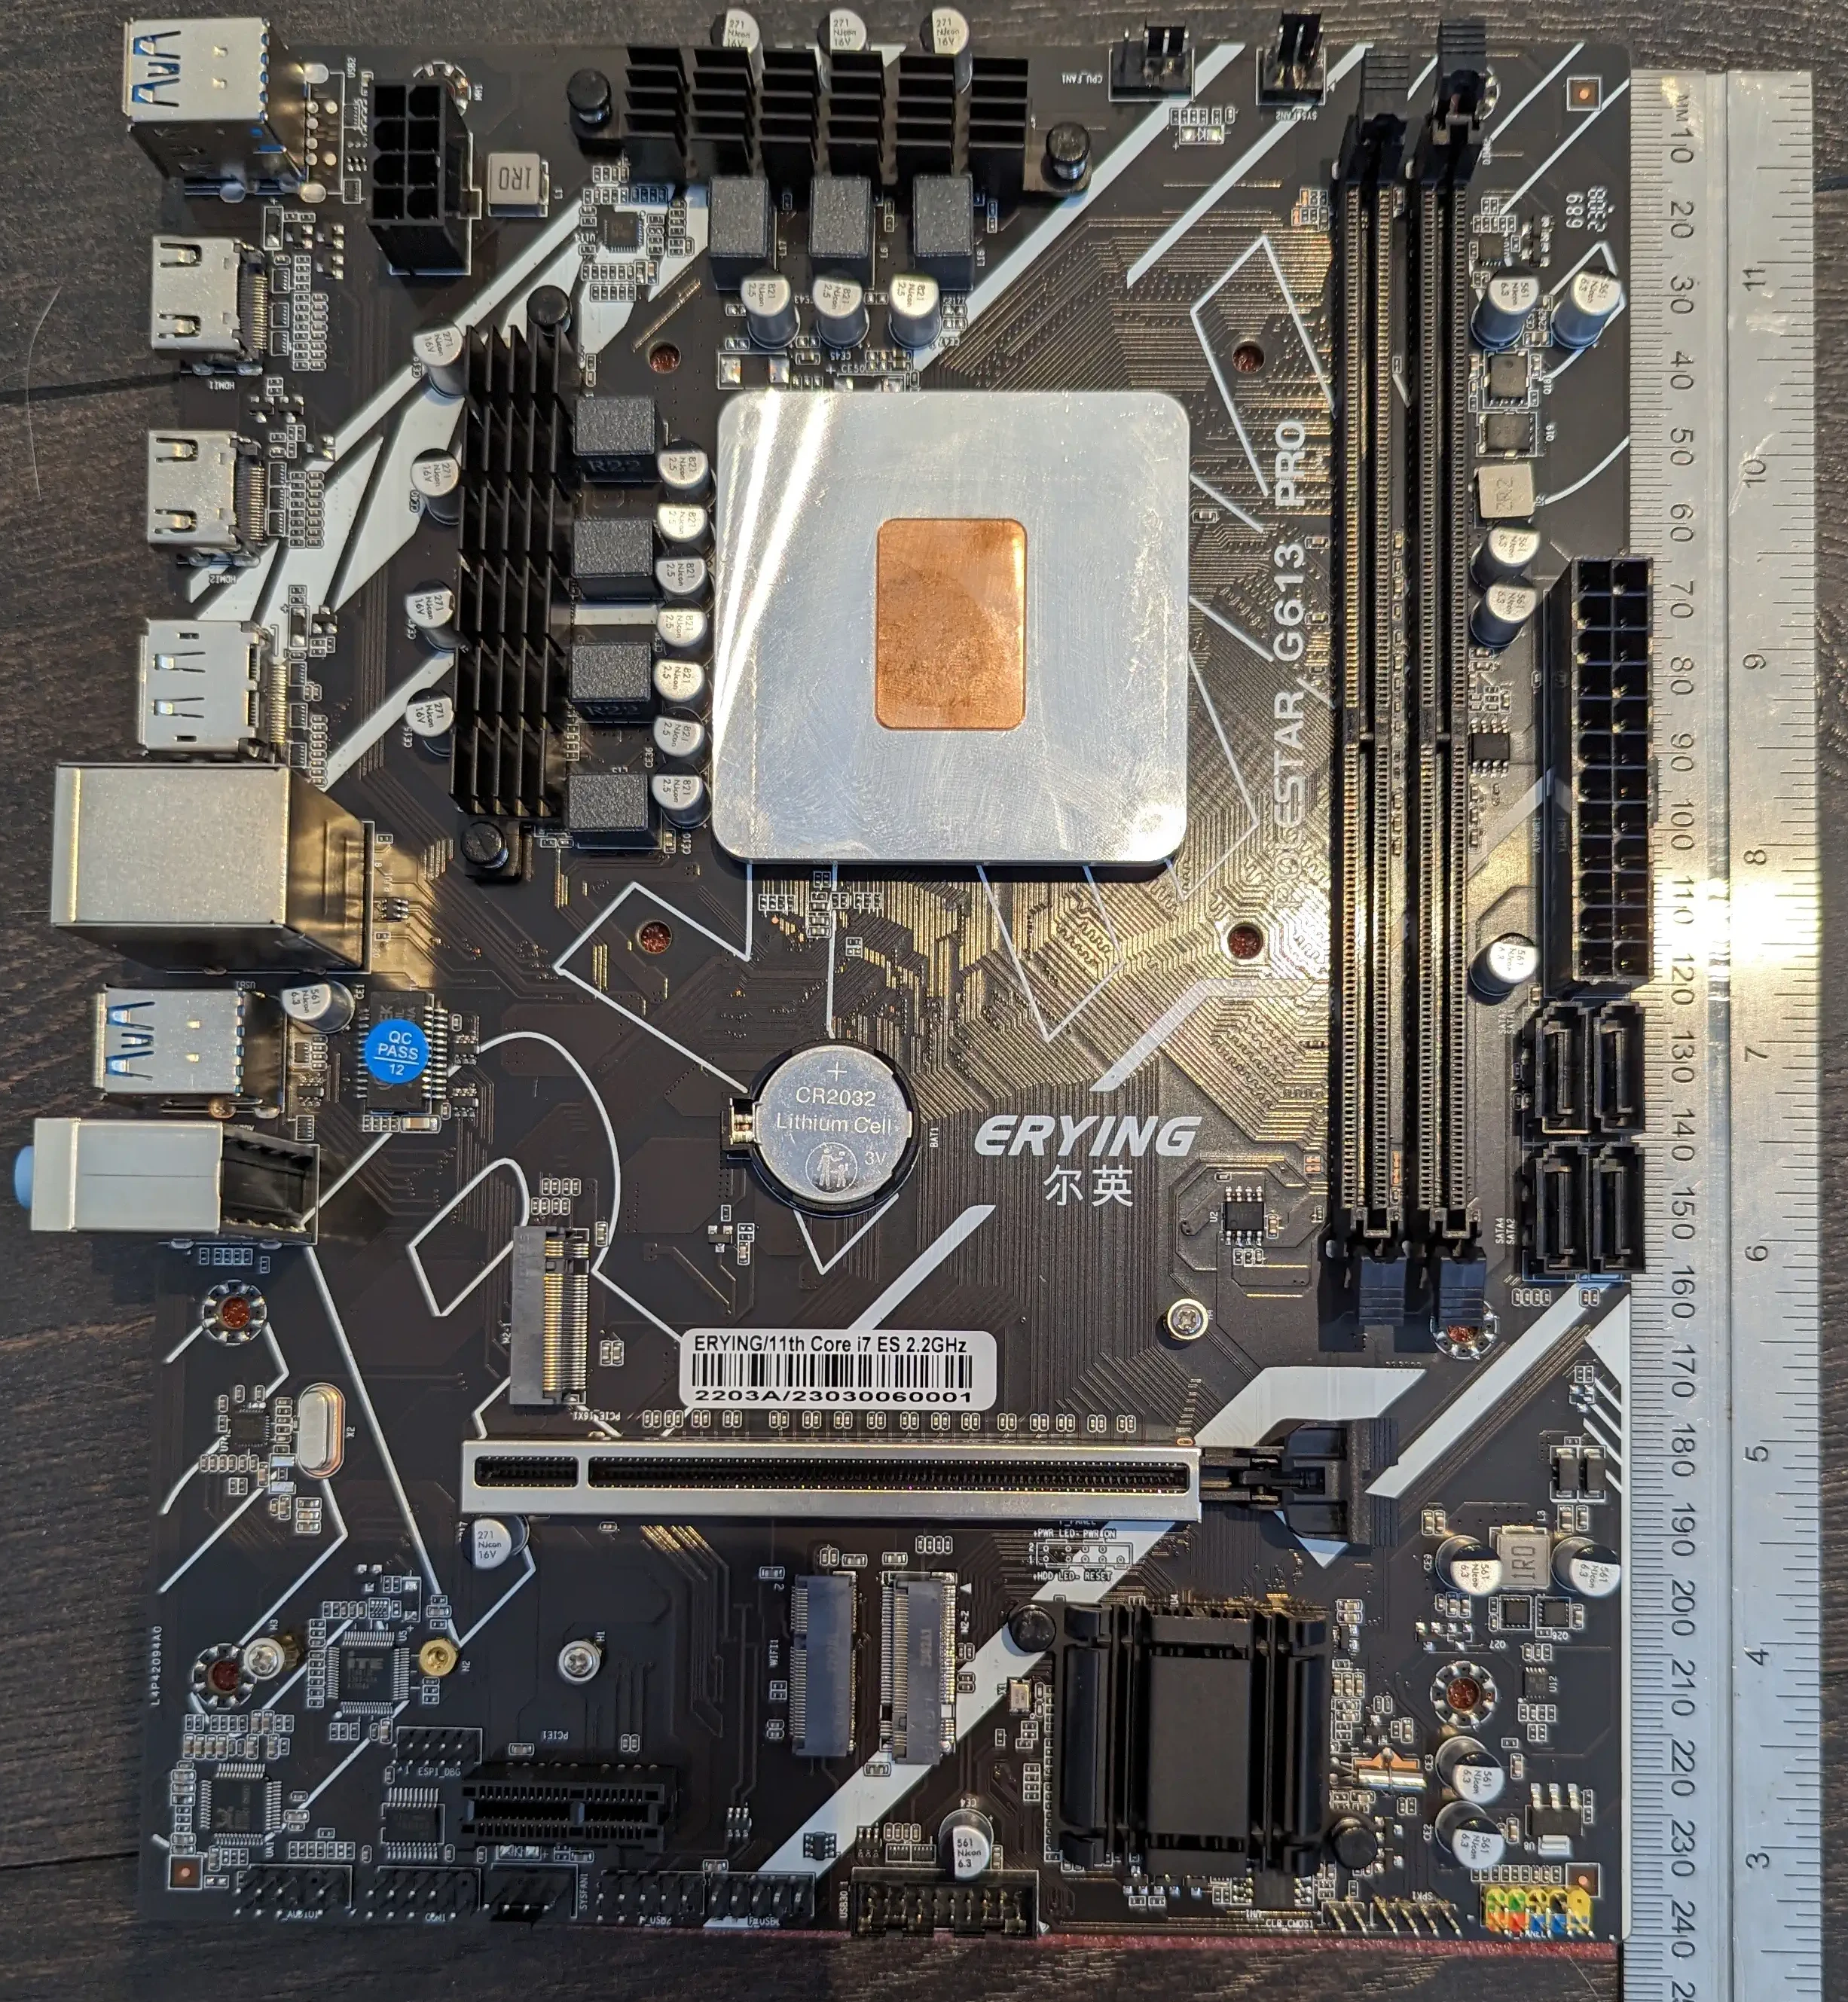 The front face of the Erying motherboard